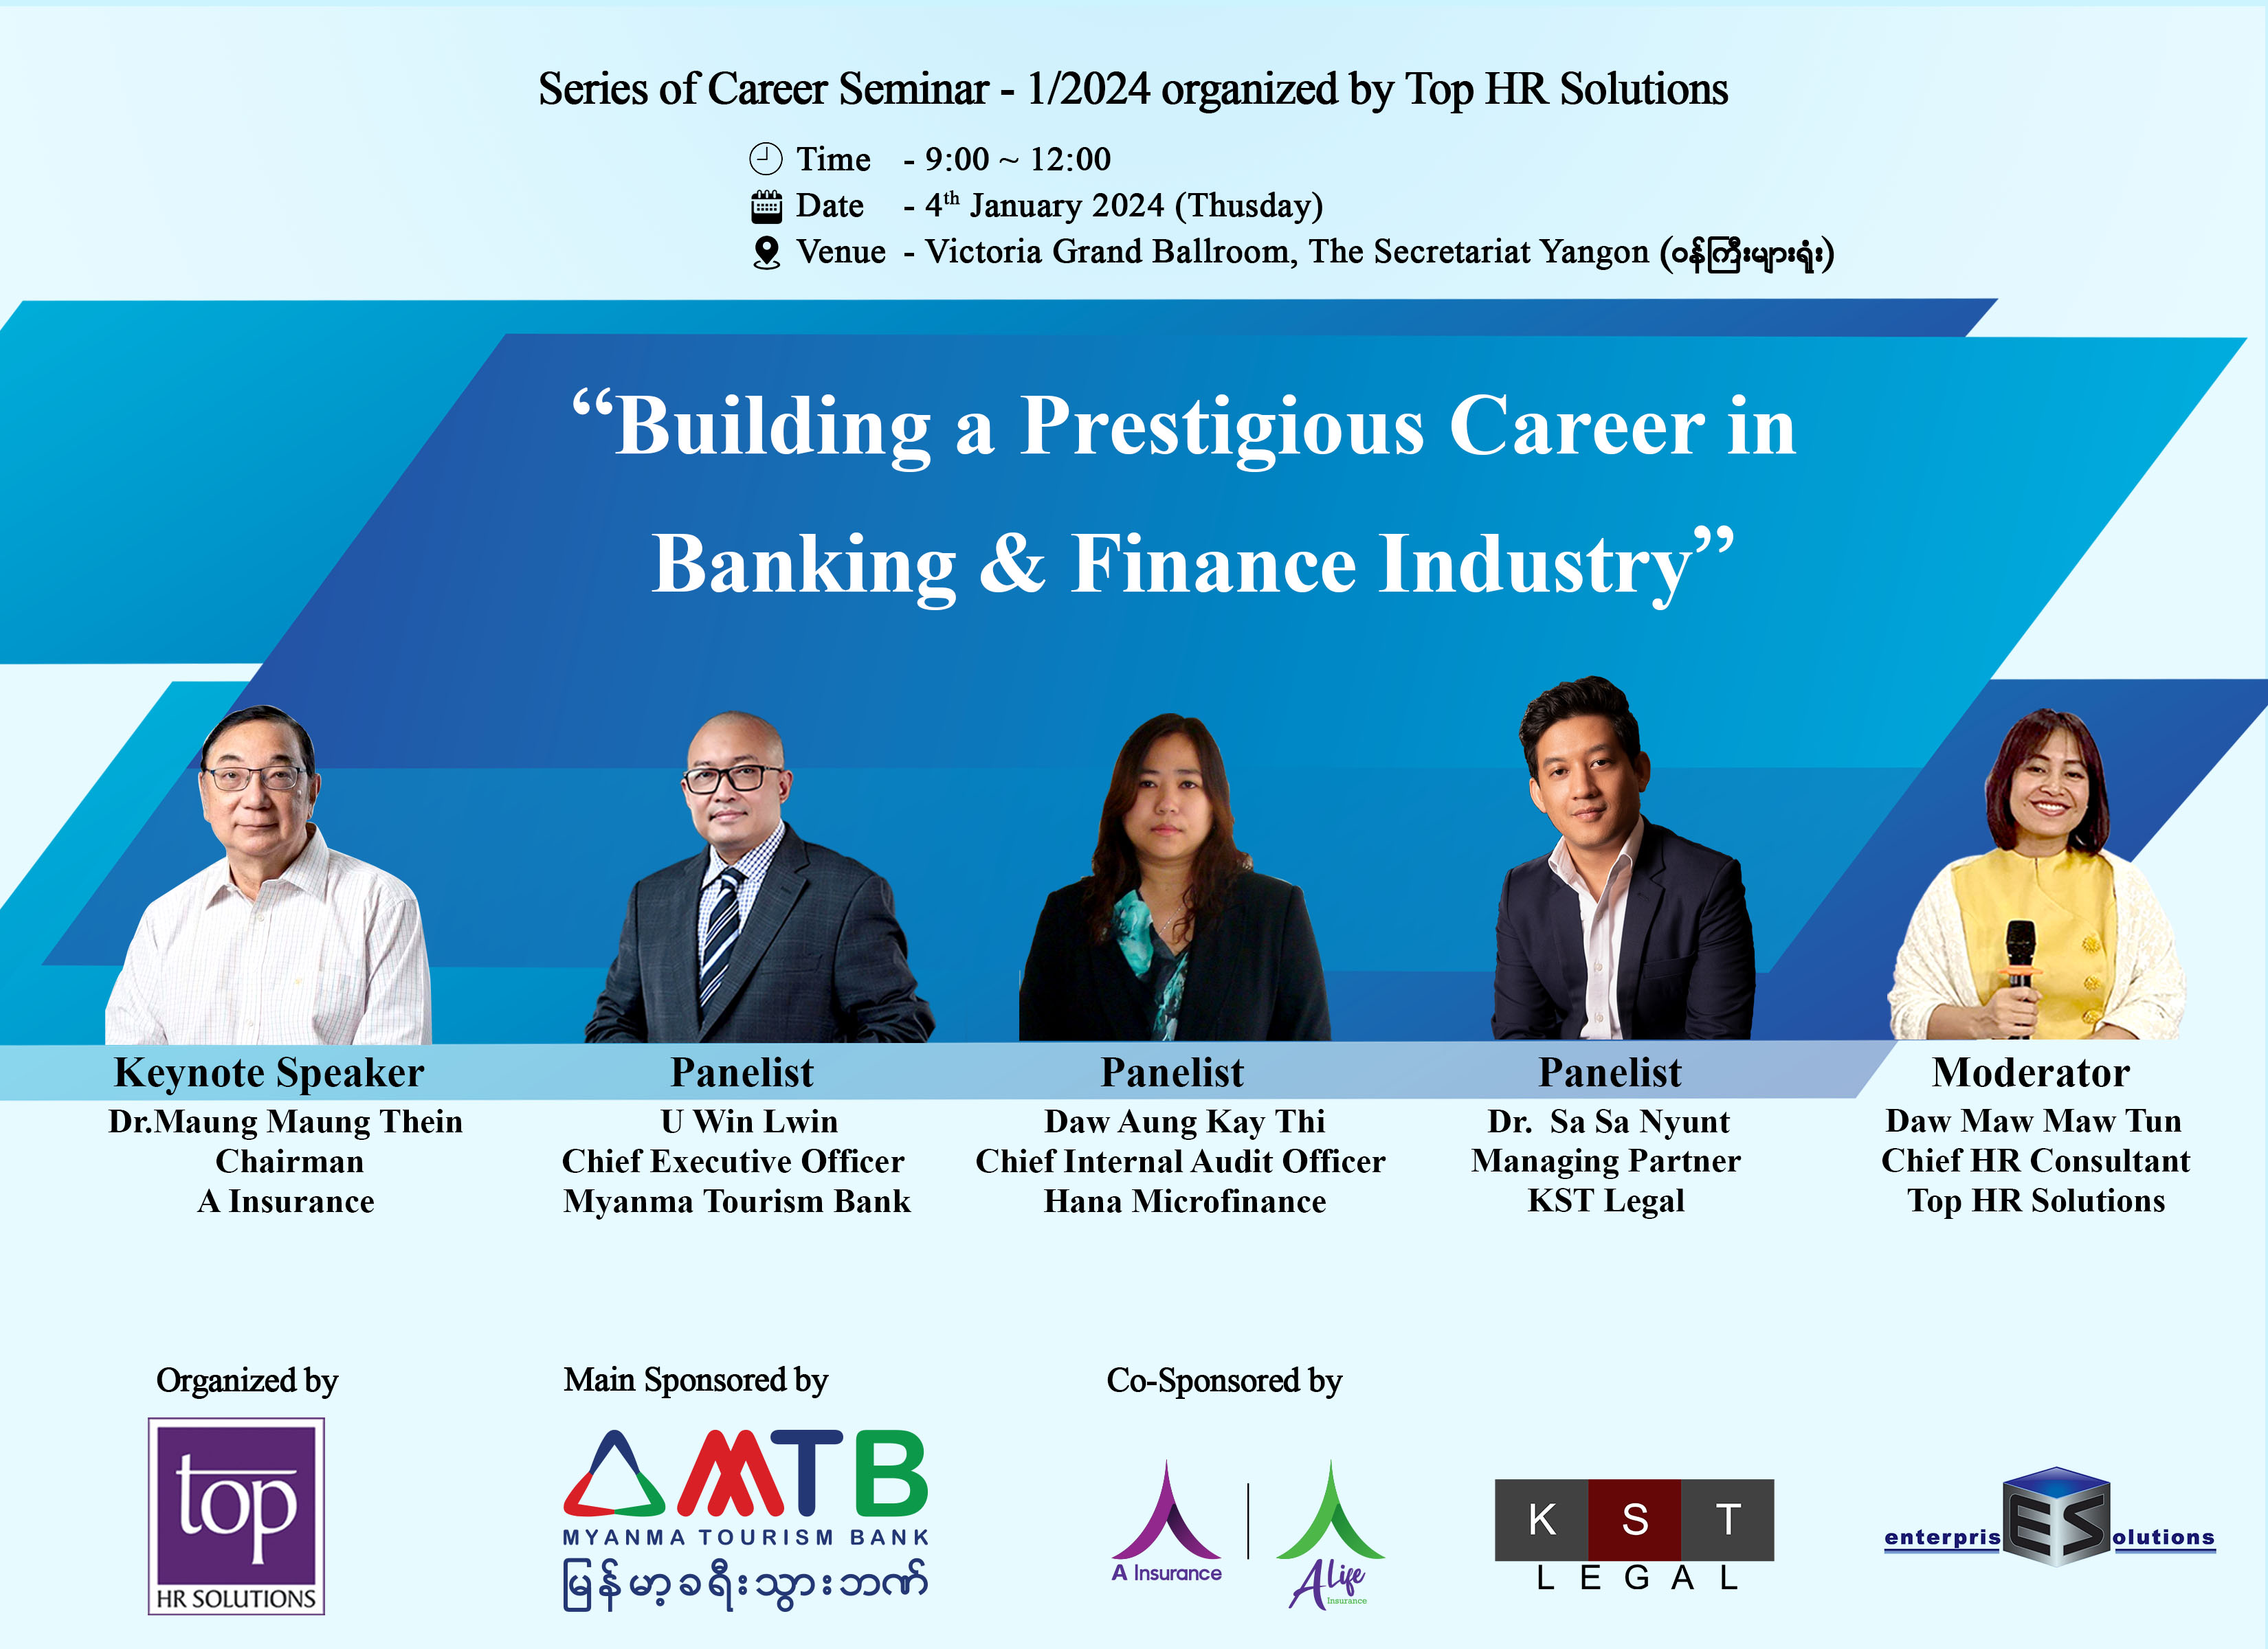 Building a Prestigious Career in Banking & Finance Industry